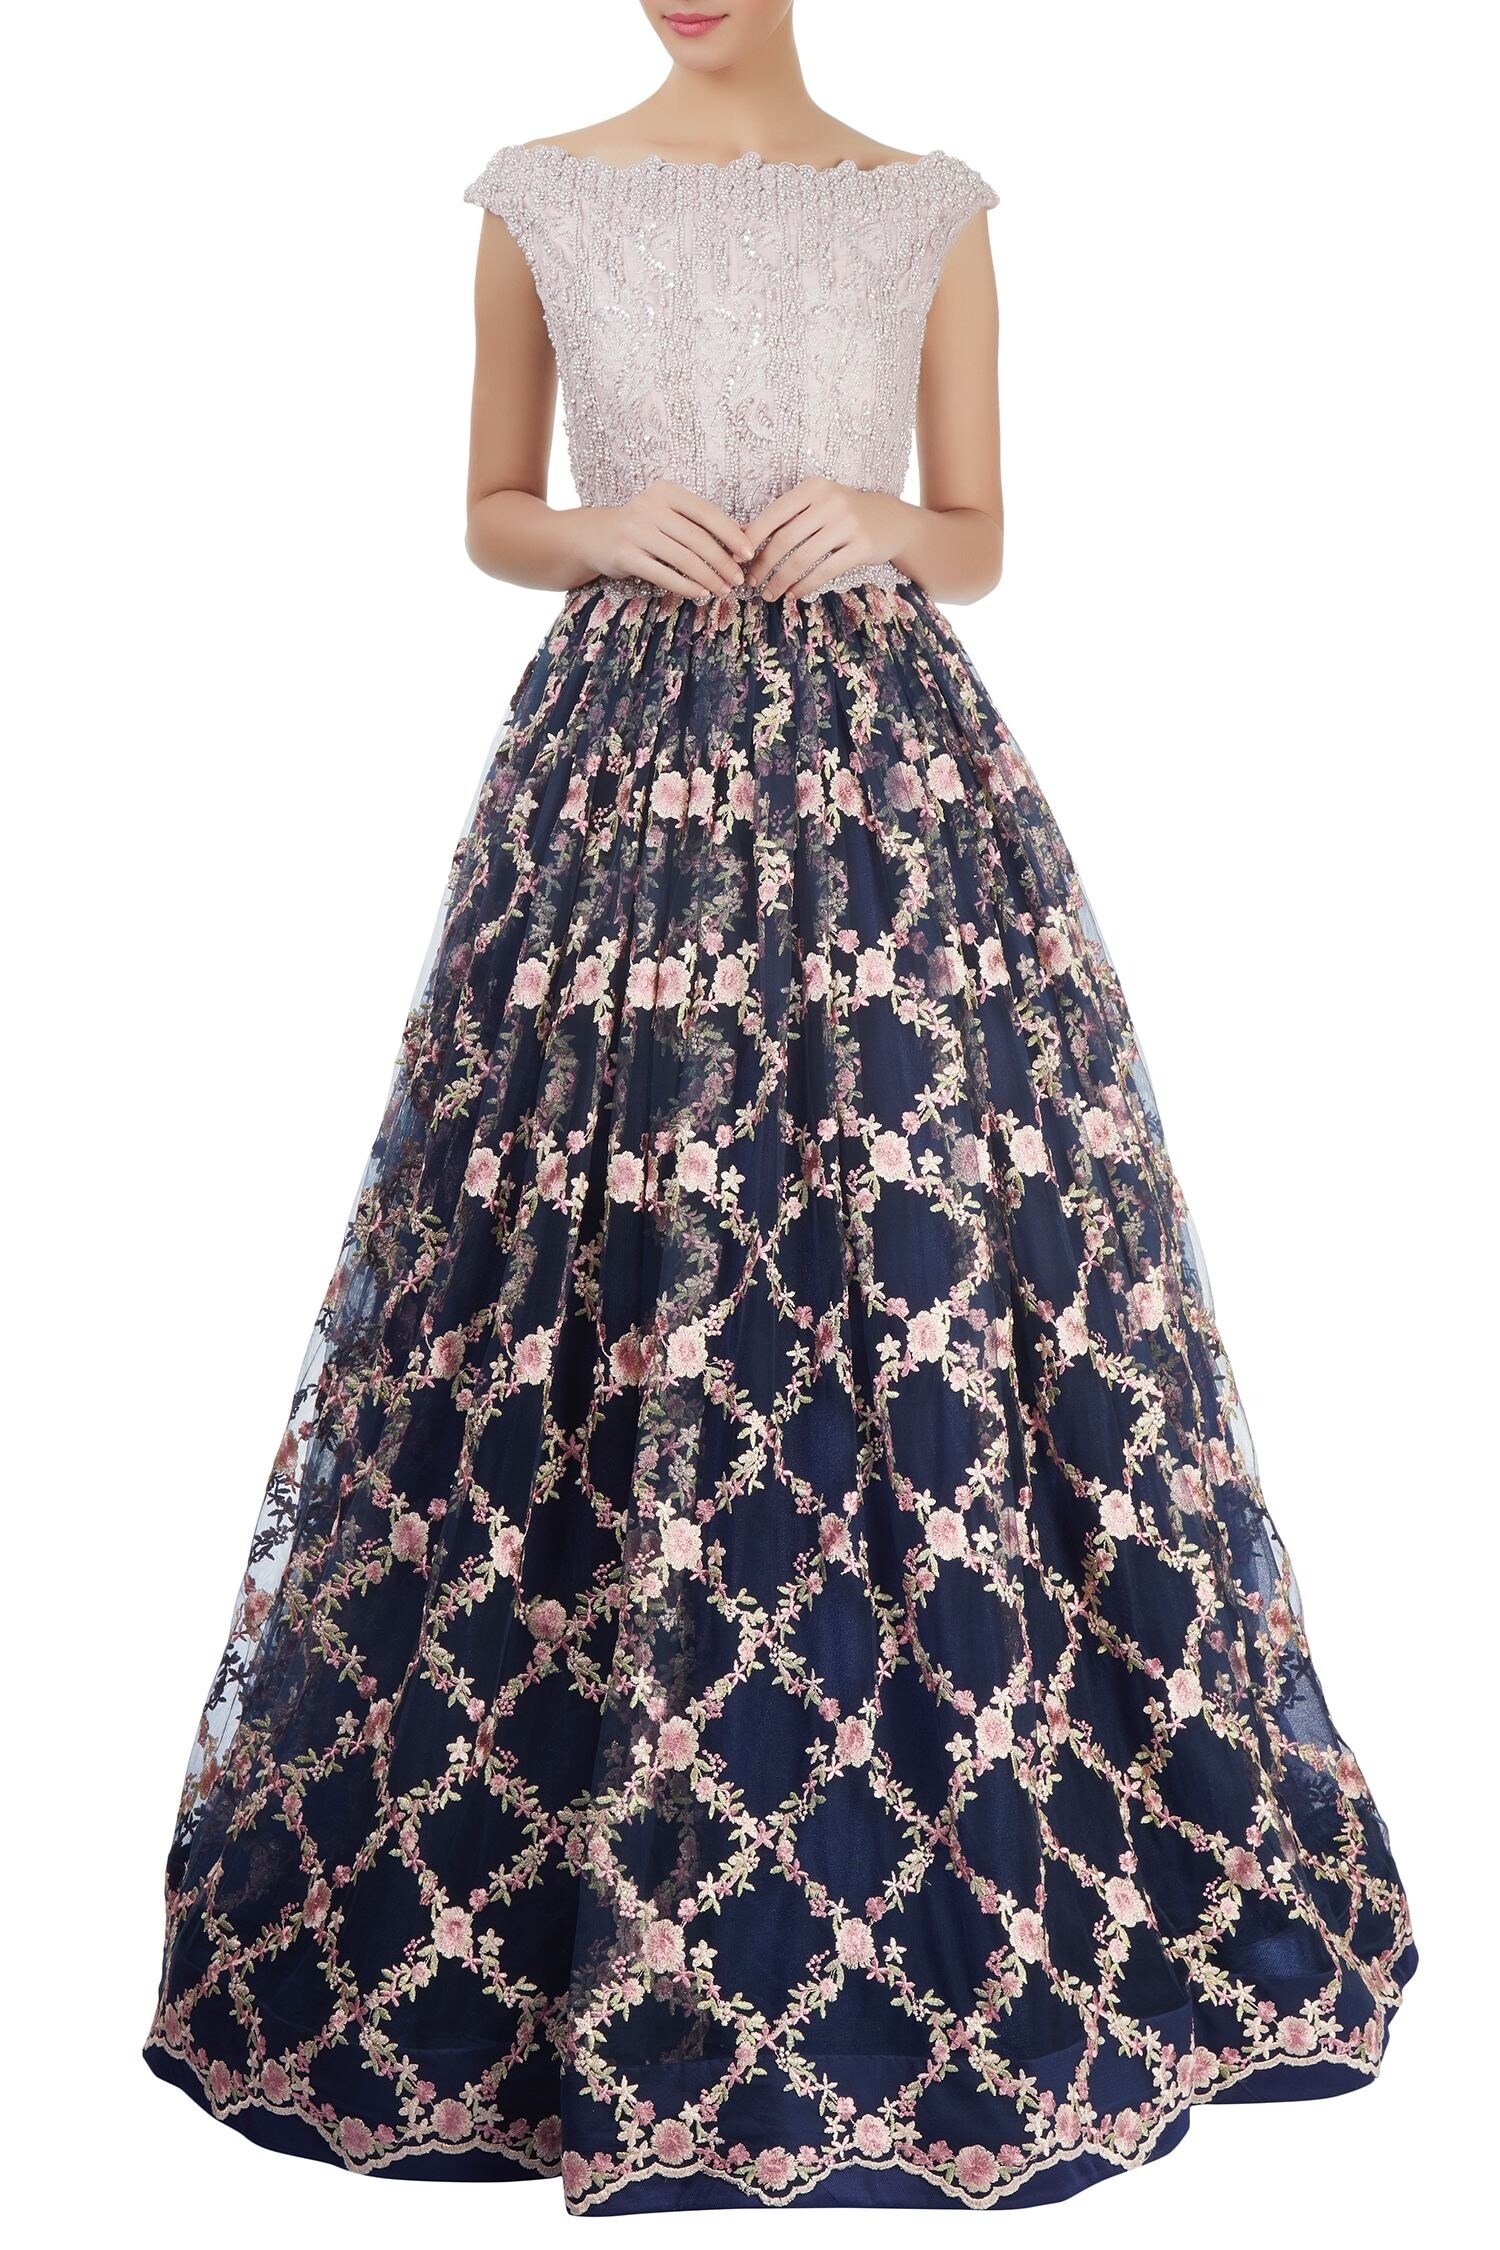 Buy Lavender & navy blue off-shoulder gown by Neeta Lulla at Aza Fashions